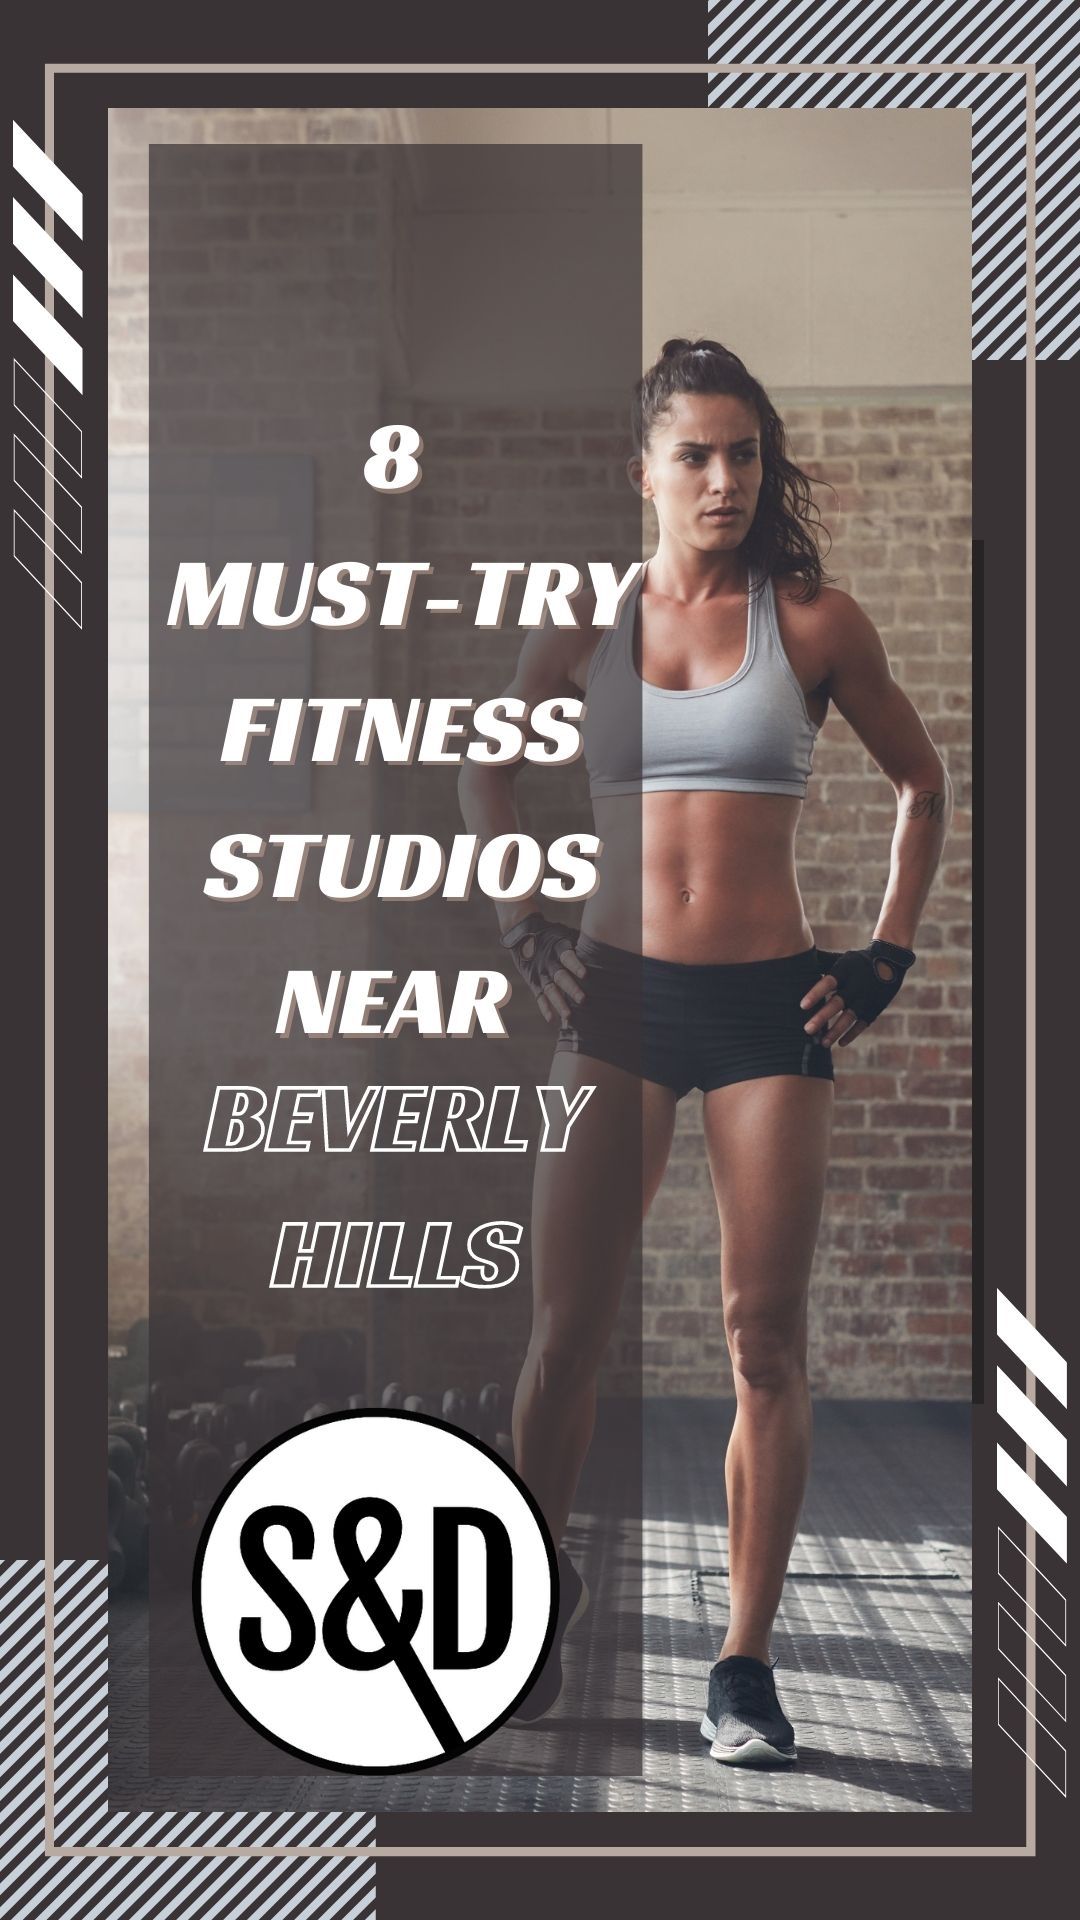 8 Must-Try Fitness Studios Near Beverly Hills